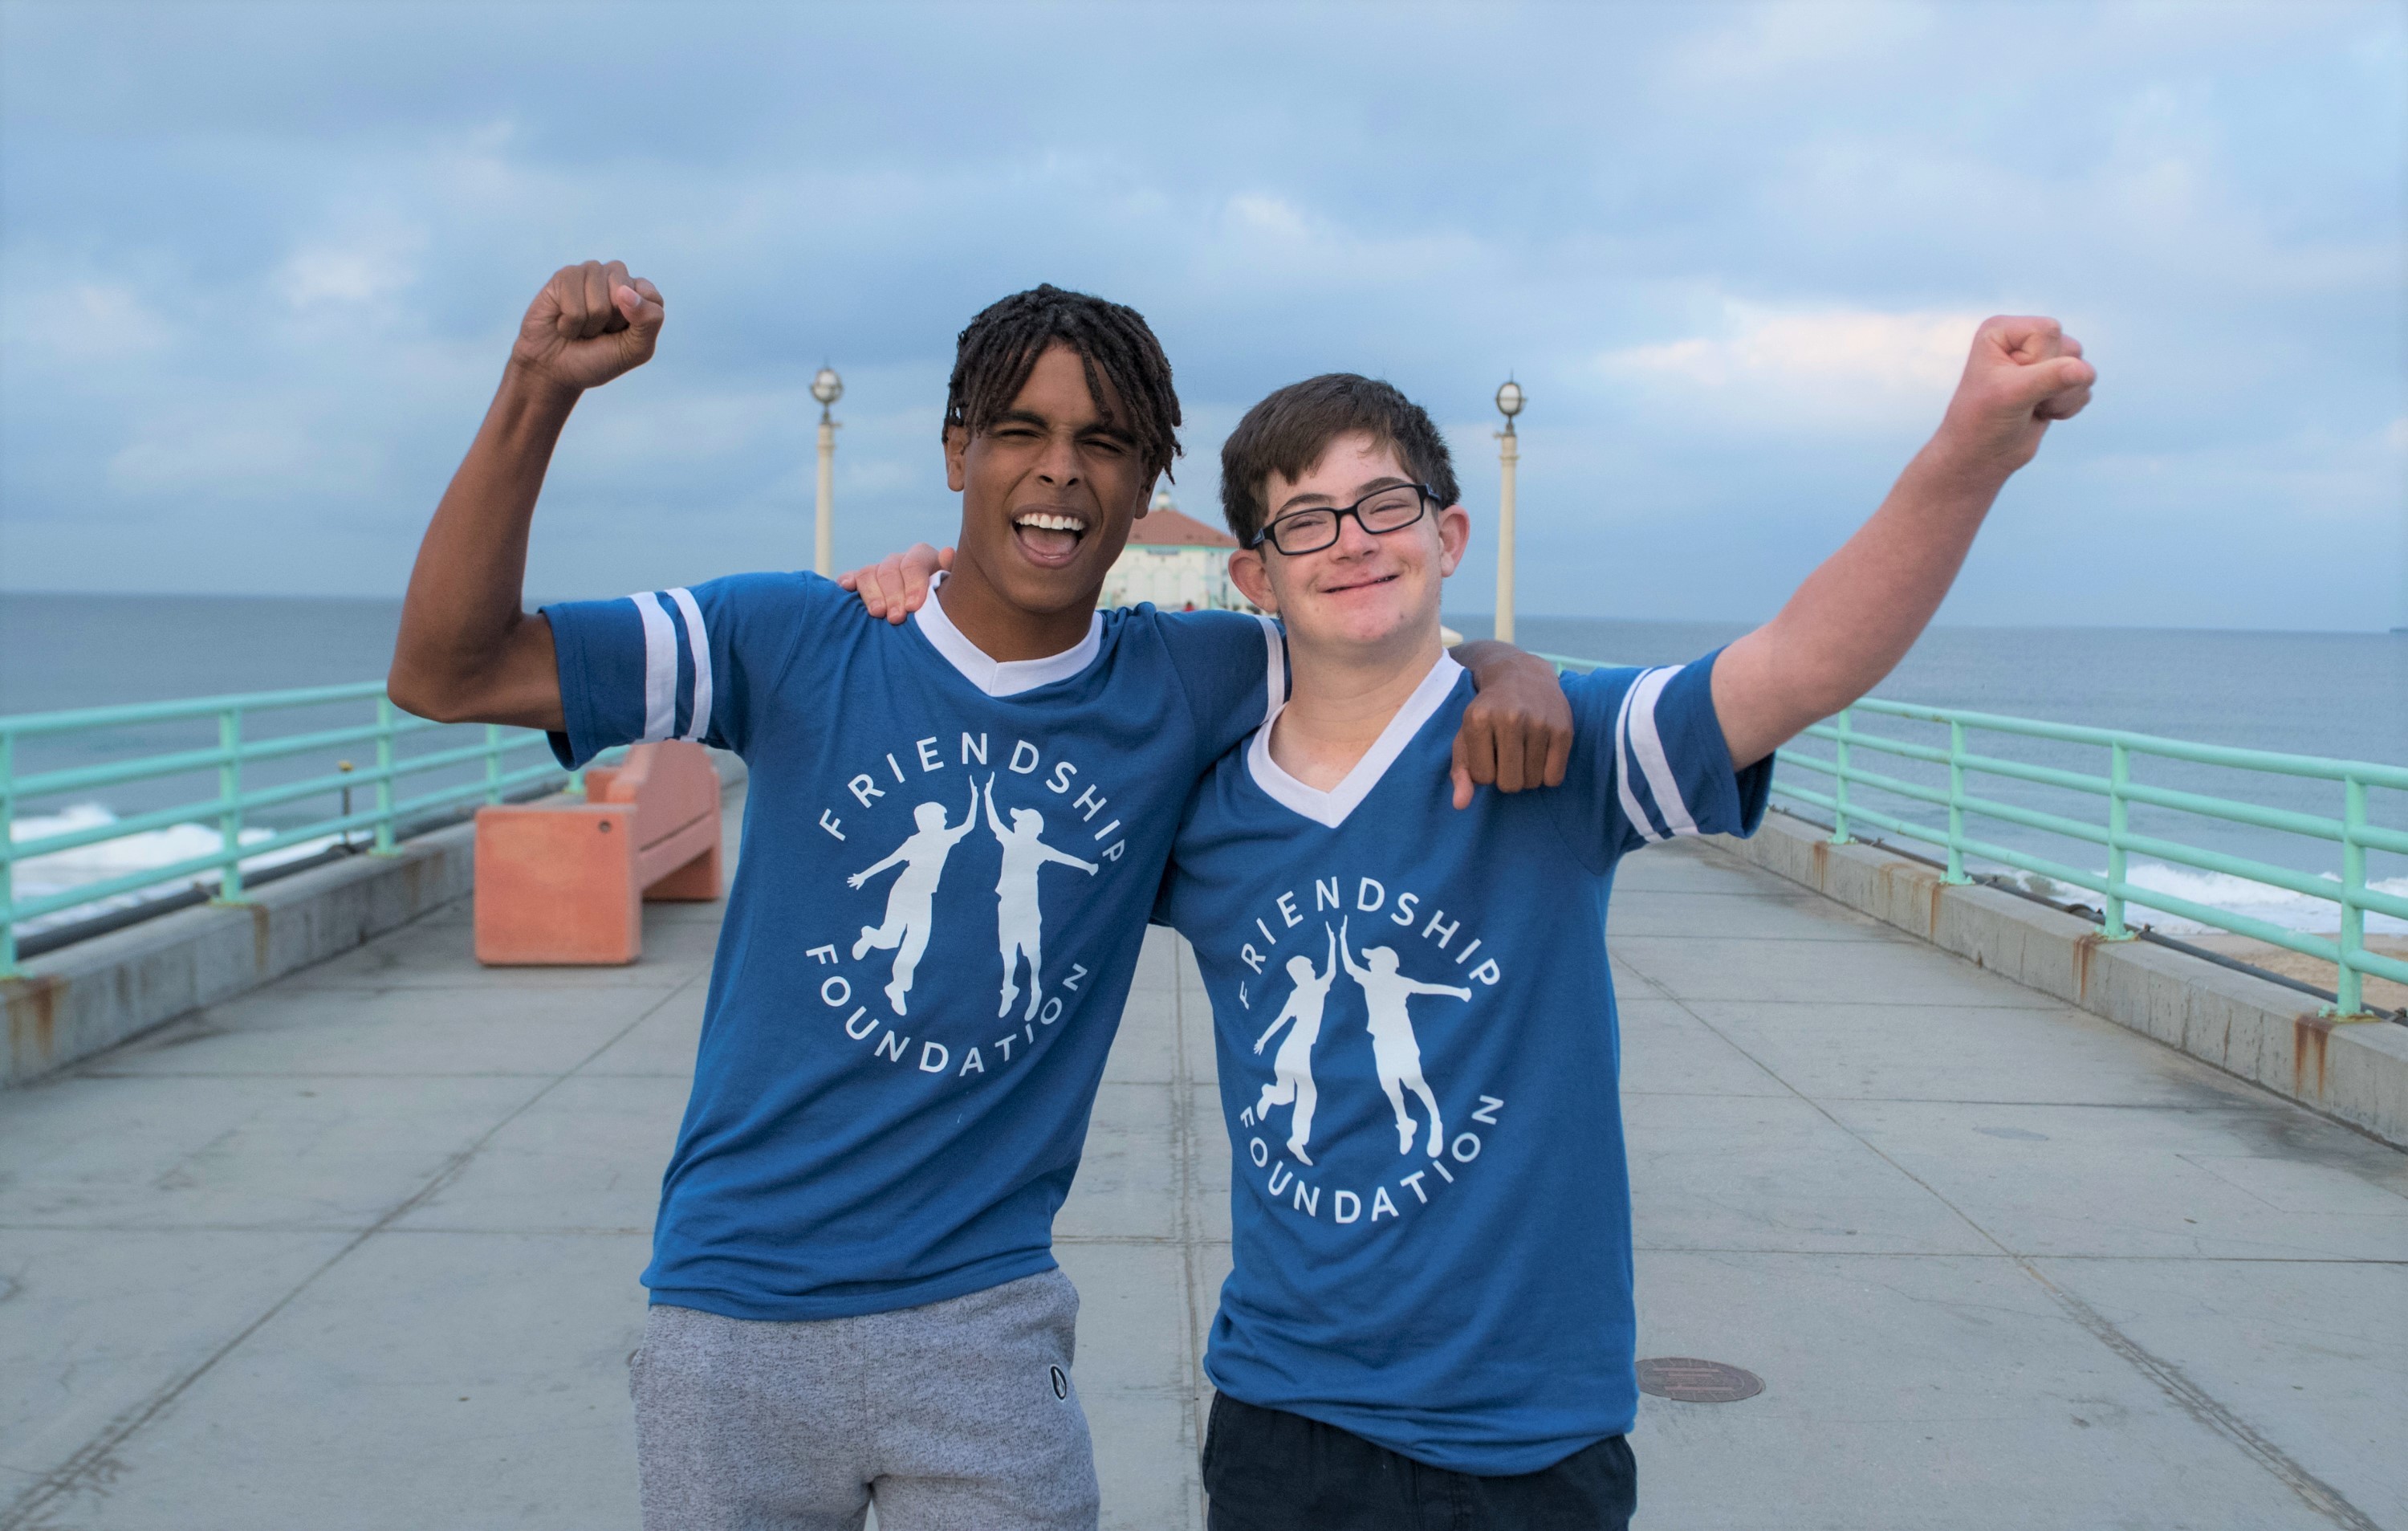 12th Annual Skechers Pier to Pier Friendship Walk Star-studded Virtual Event to Raise Million for Kids | Business Wire